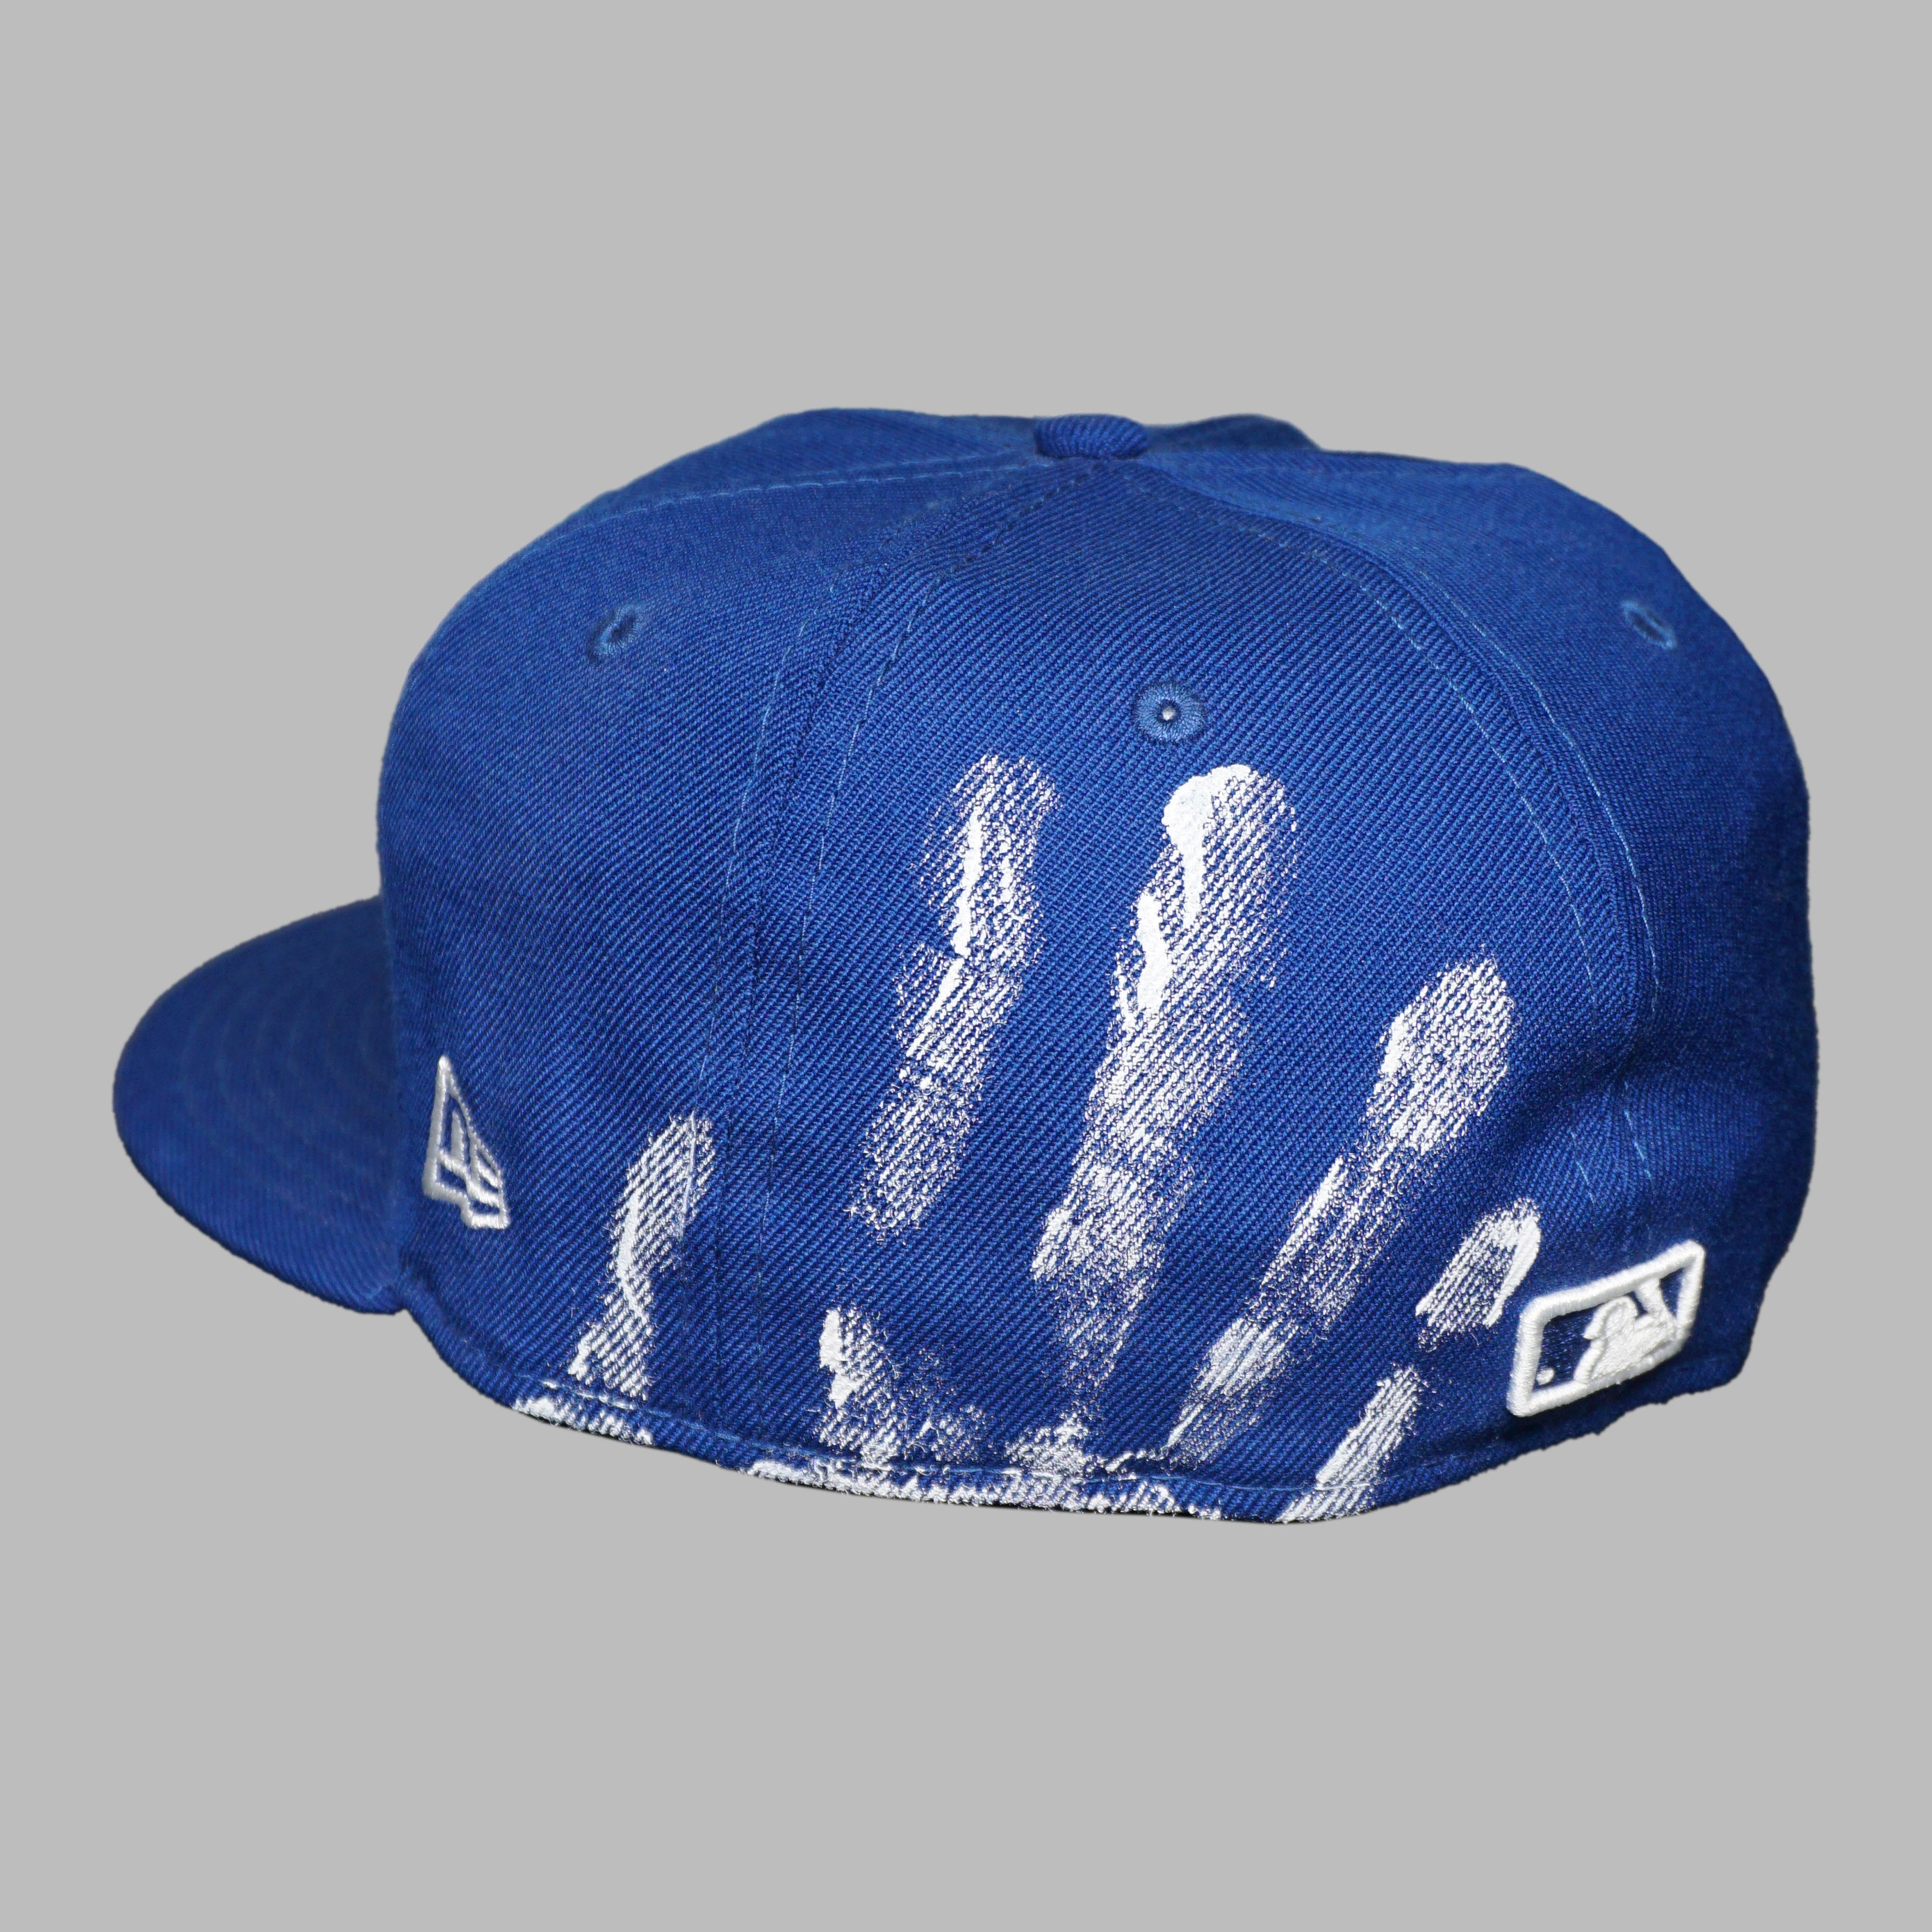 BLUE WISDOM FITTED (size 7 1/4)